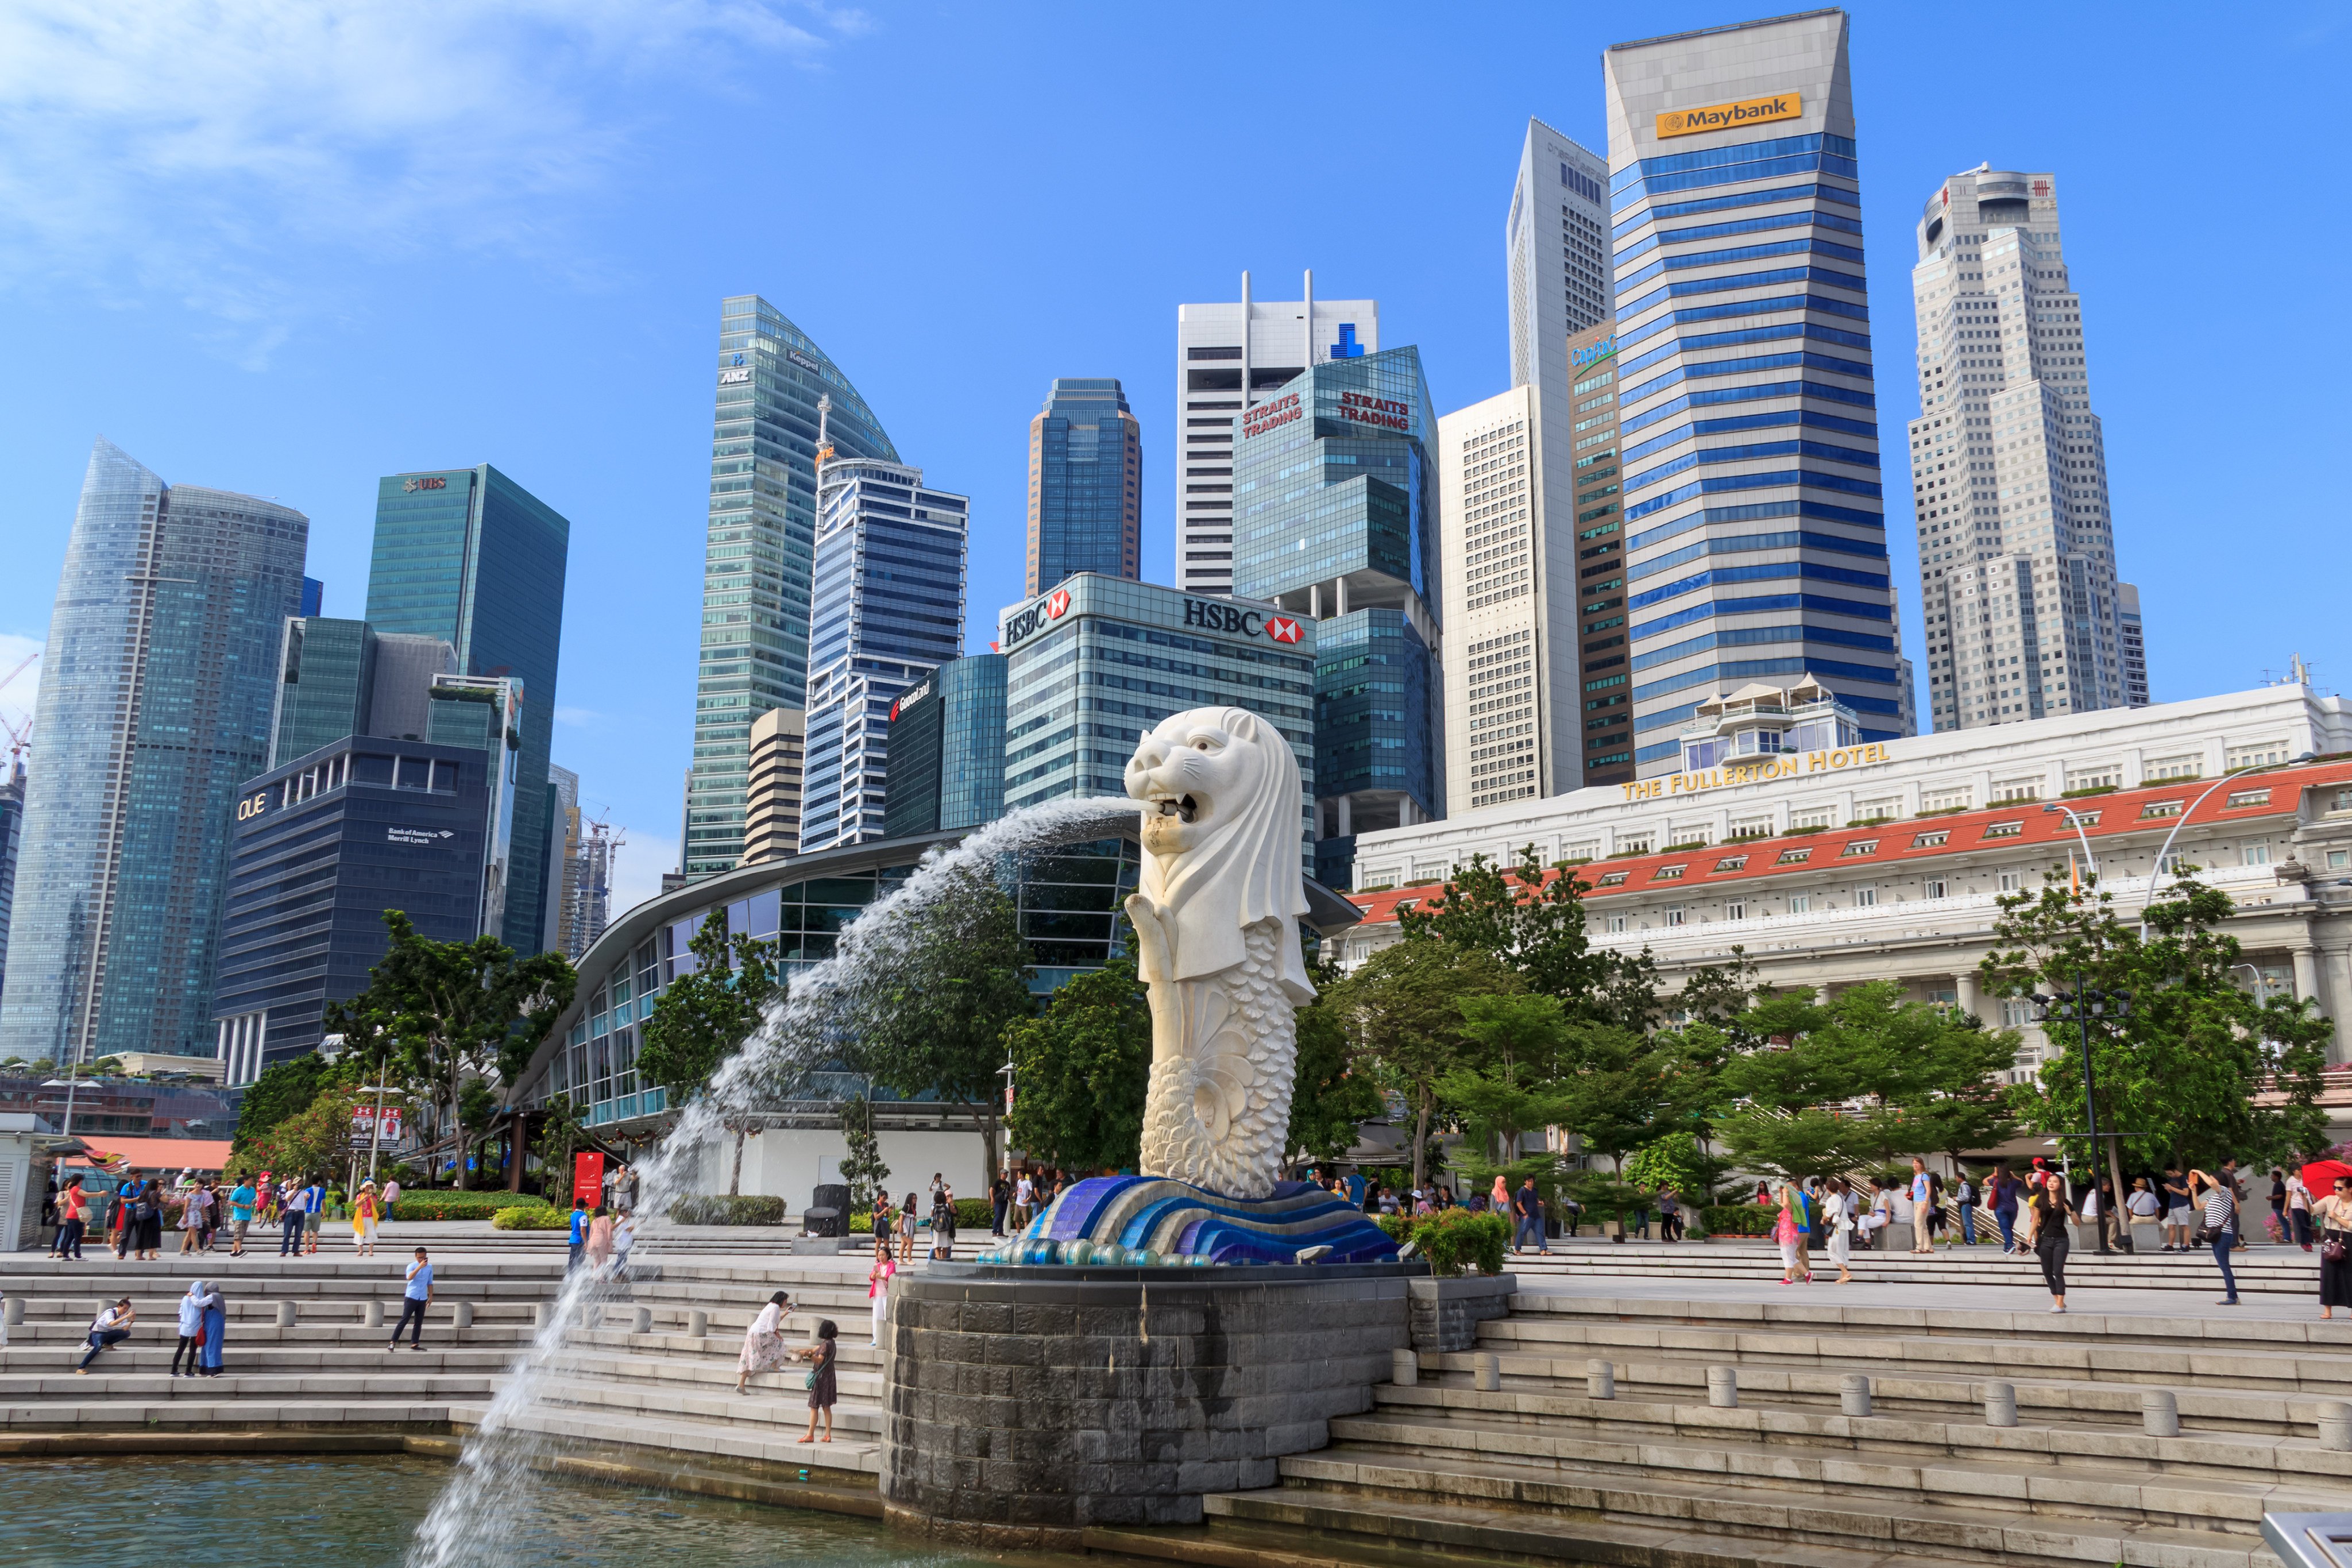 The least risky city to visit in the world is Singapore, a recent Forbes Advisor study found. Photo: Shutterstock